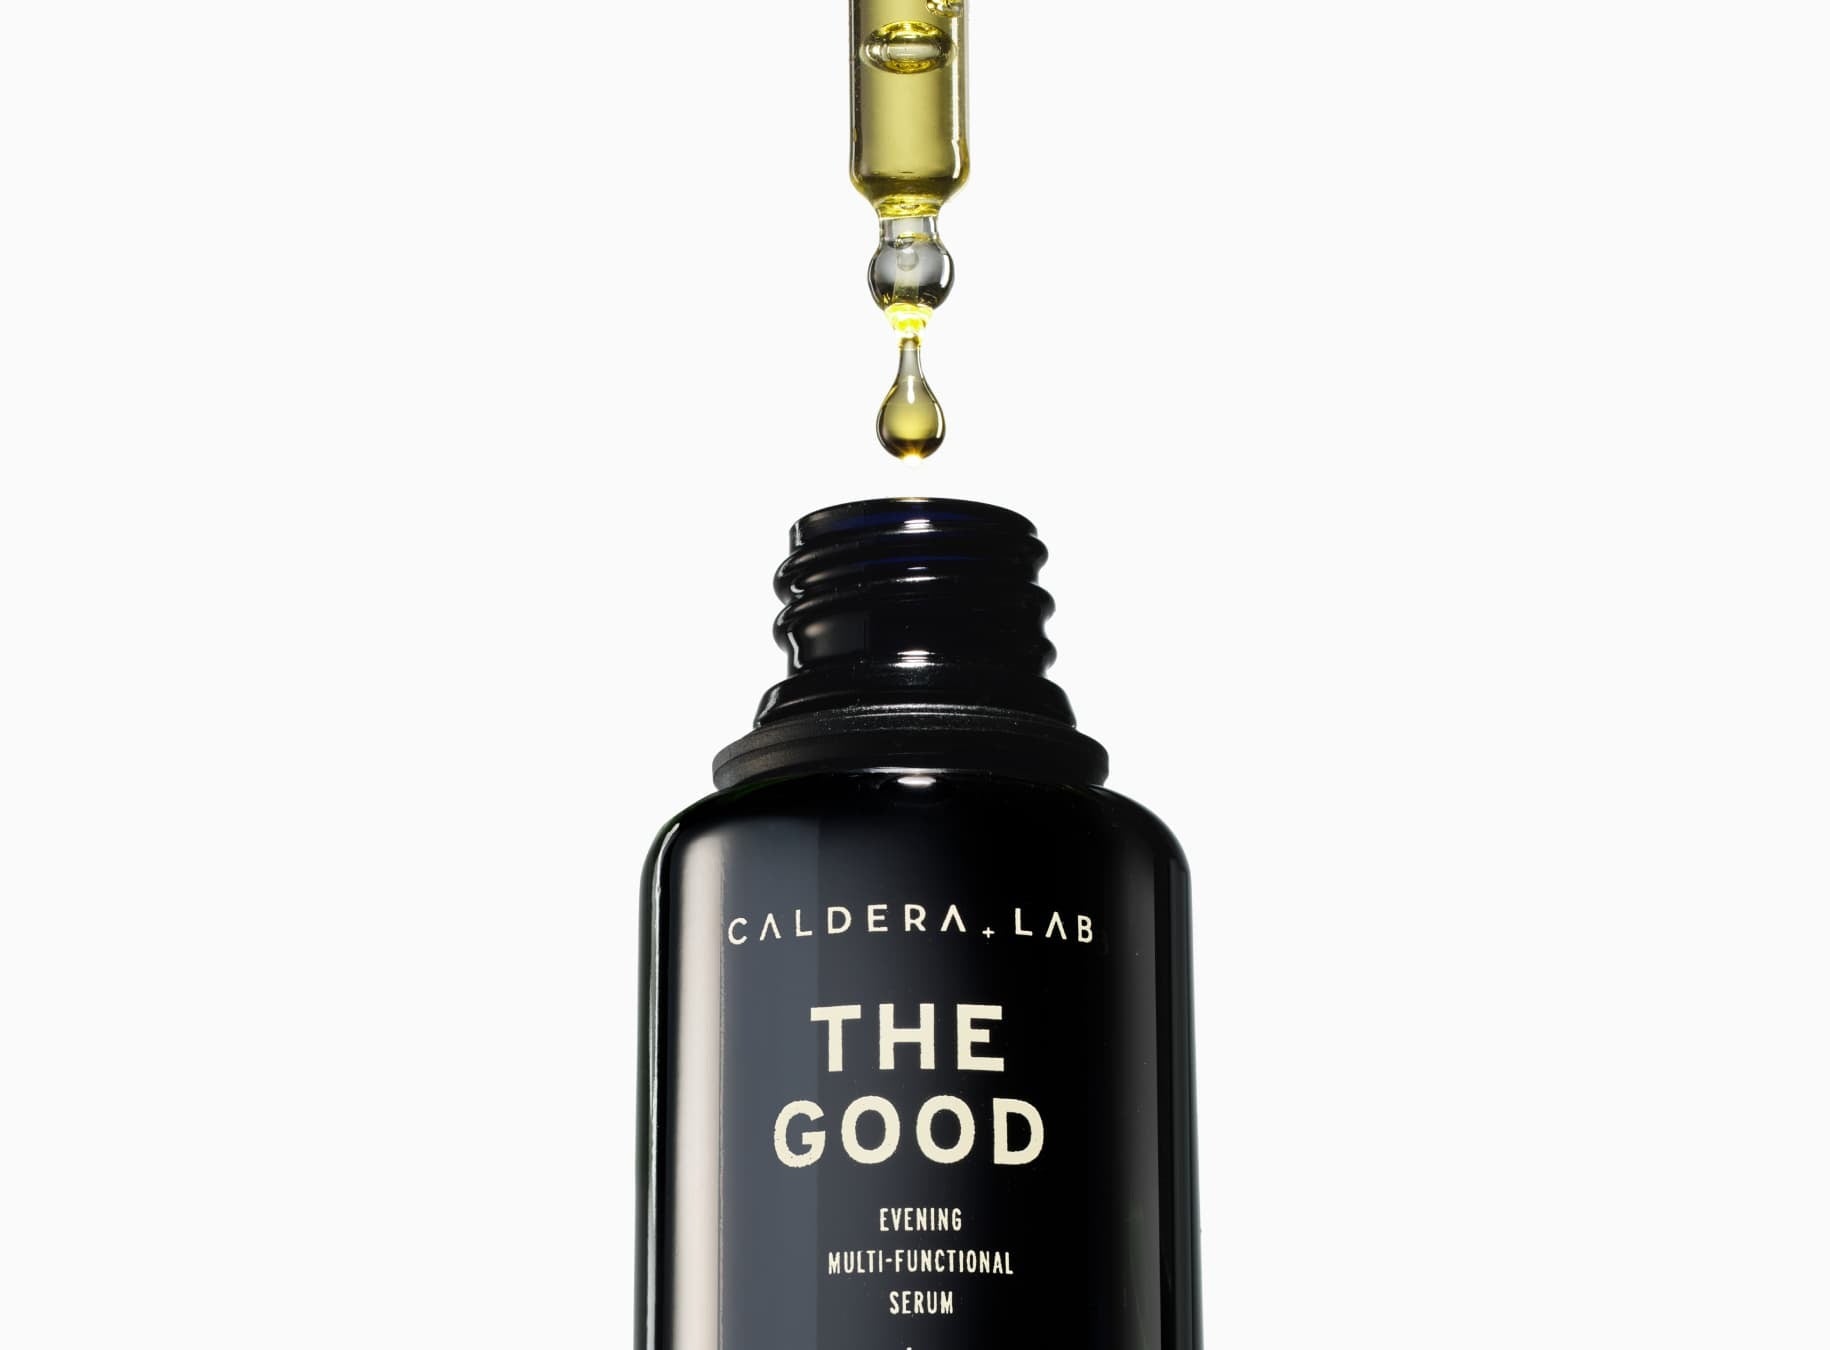 The dropper dispensing a drop of The Good Serum into a black glass bottle.